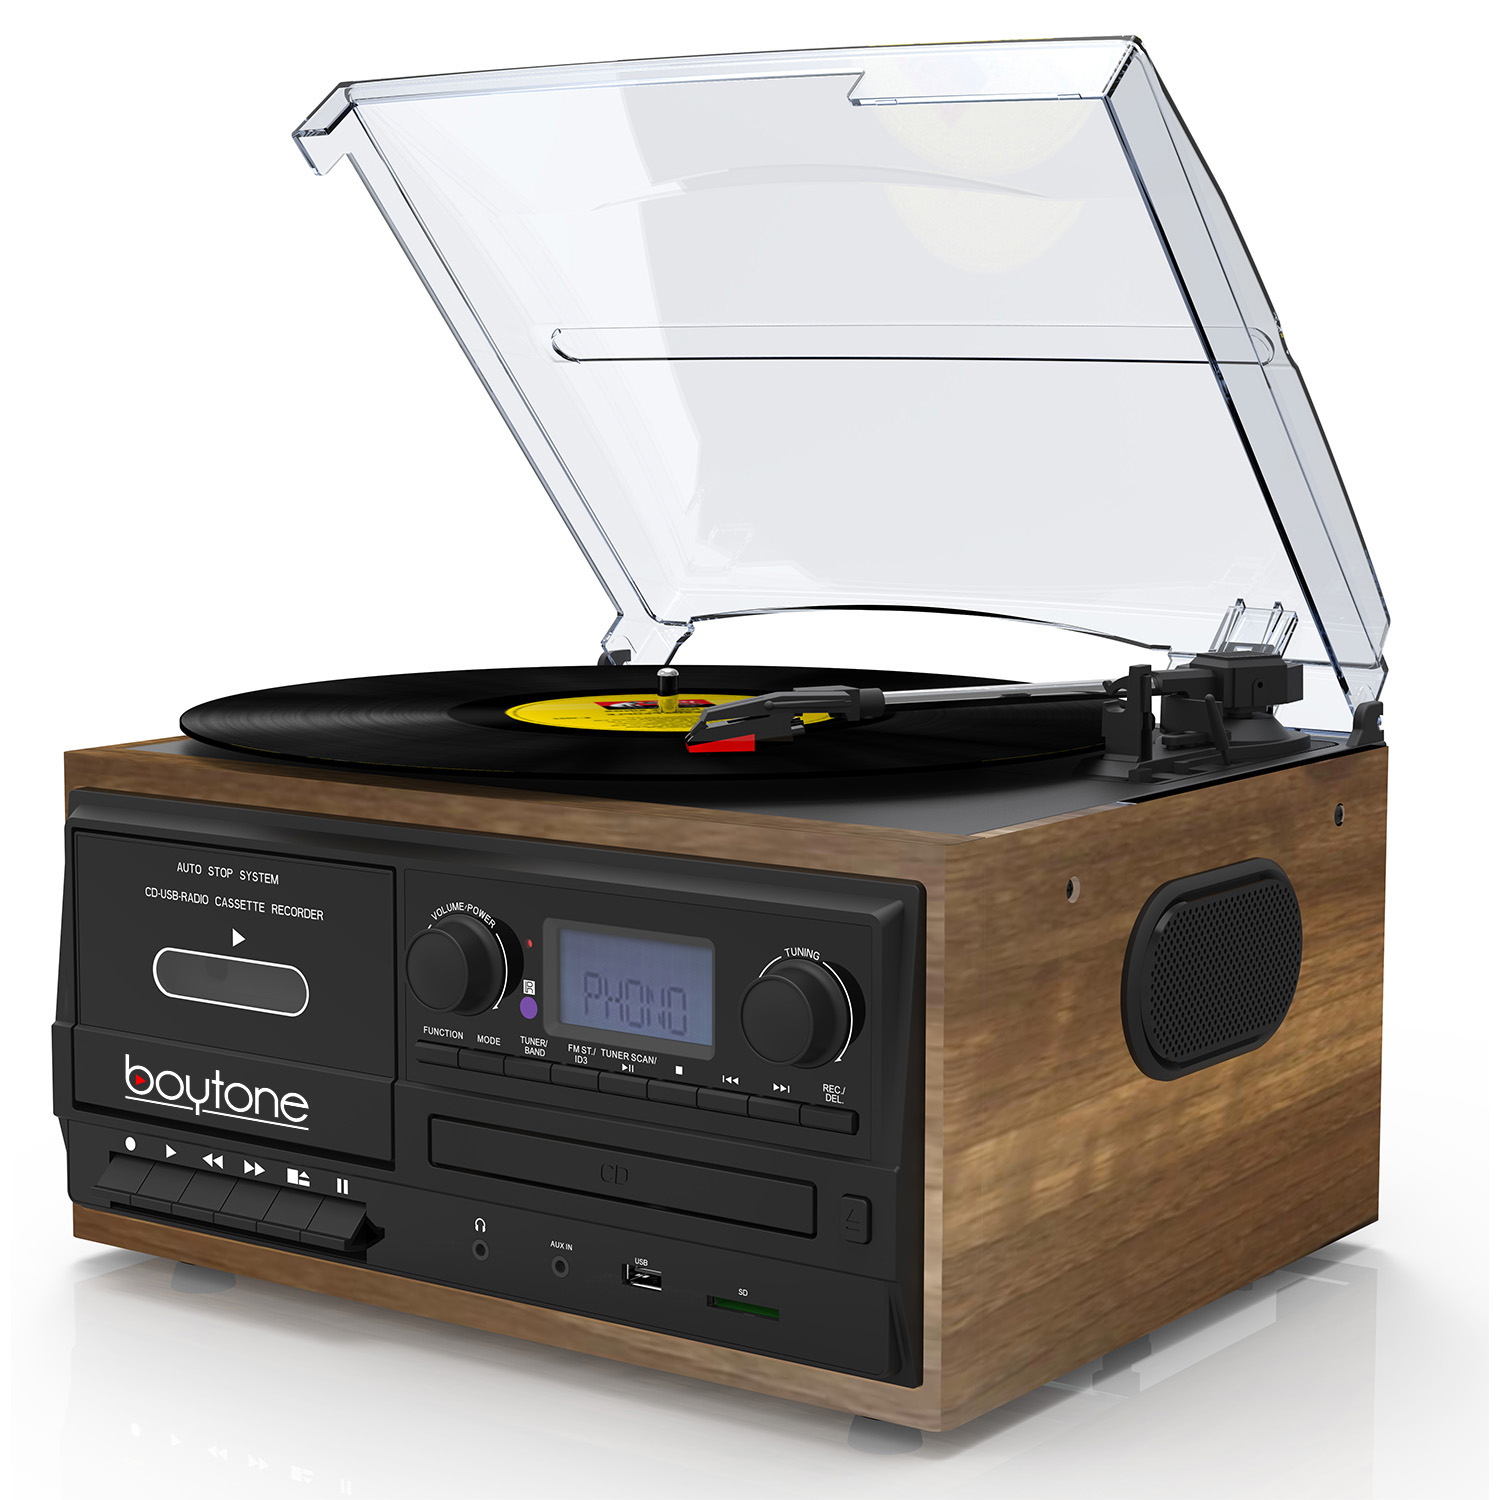 Boytone BT-32W, Bluetooth Record Player Turntable, AM/FM Radio, Cassette, CD Player, 2 Built in Speaker, Ability to Convert Vinyl, Radio, Cassette, CD to MP3 Without a Computer, SD Slot, USB, AUX